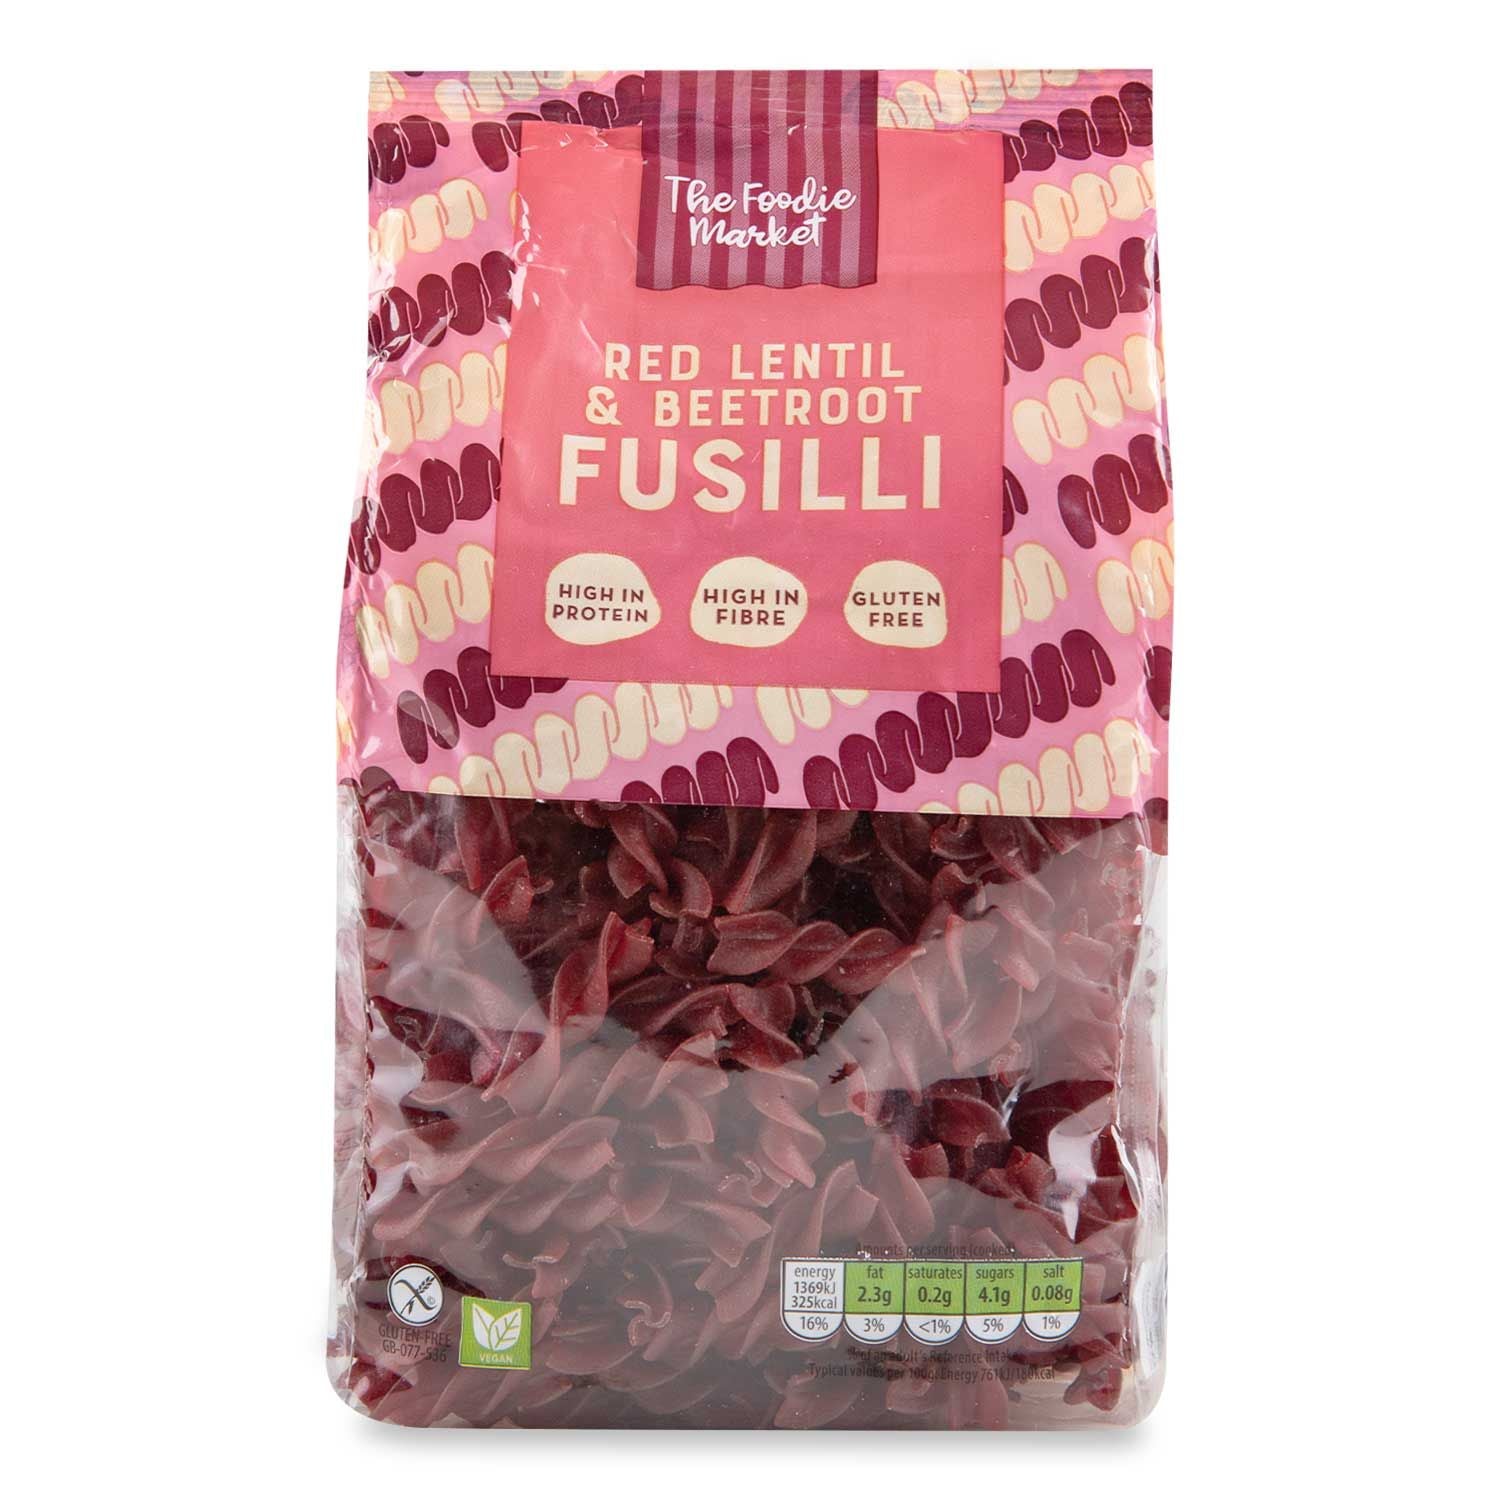 WSO -  The Foodie Market Gluten Free Red Lentil & Beetroot Fusilli 250g 1X24